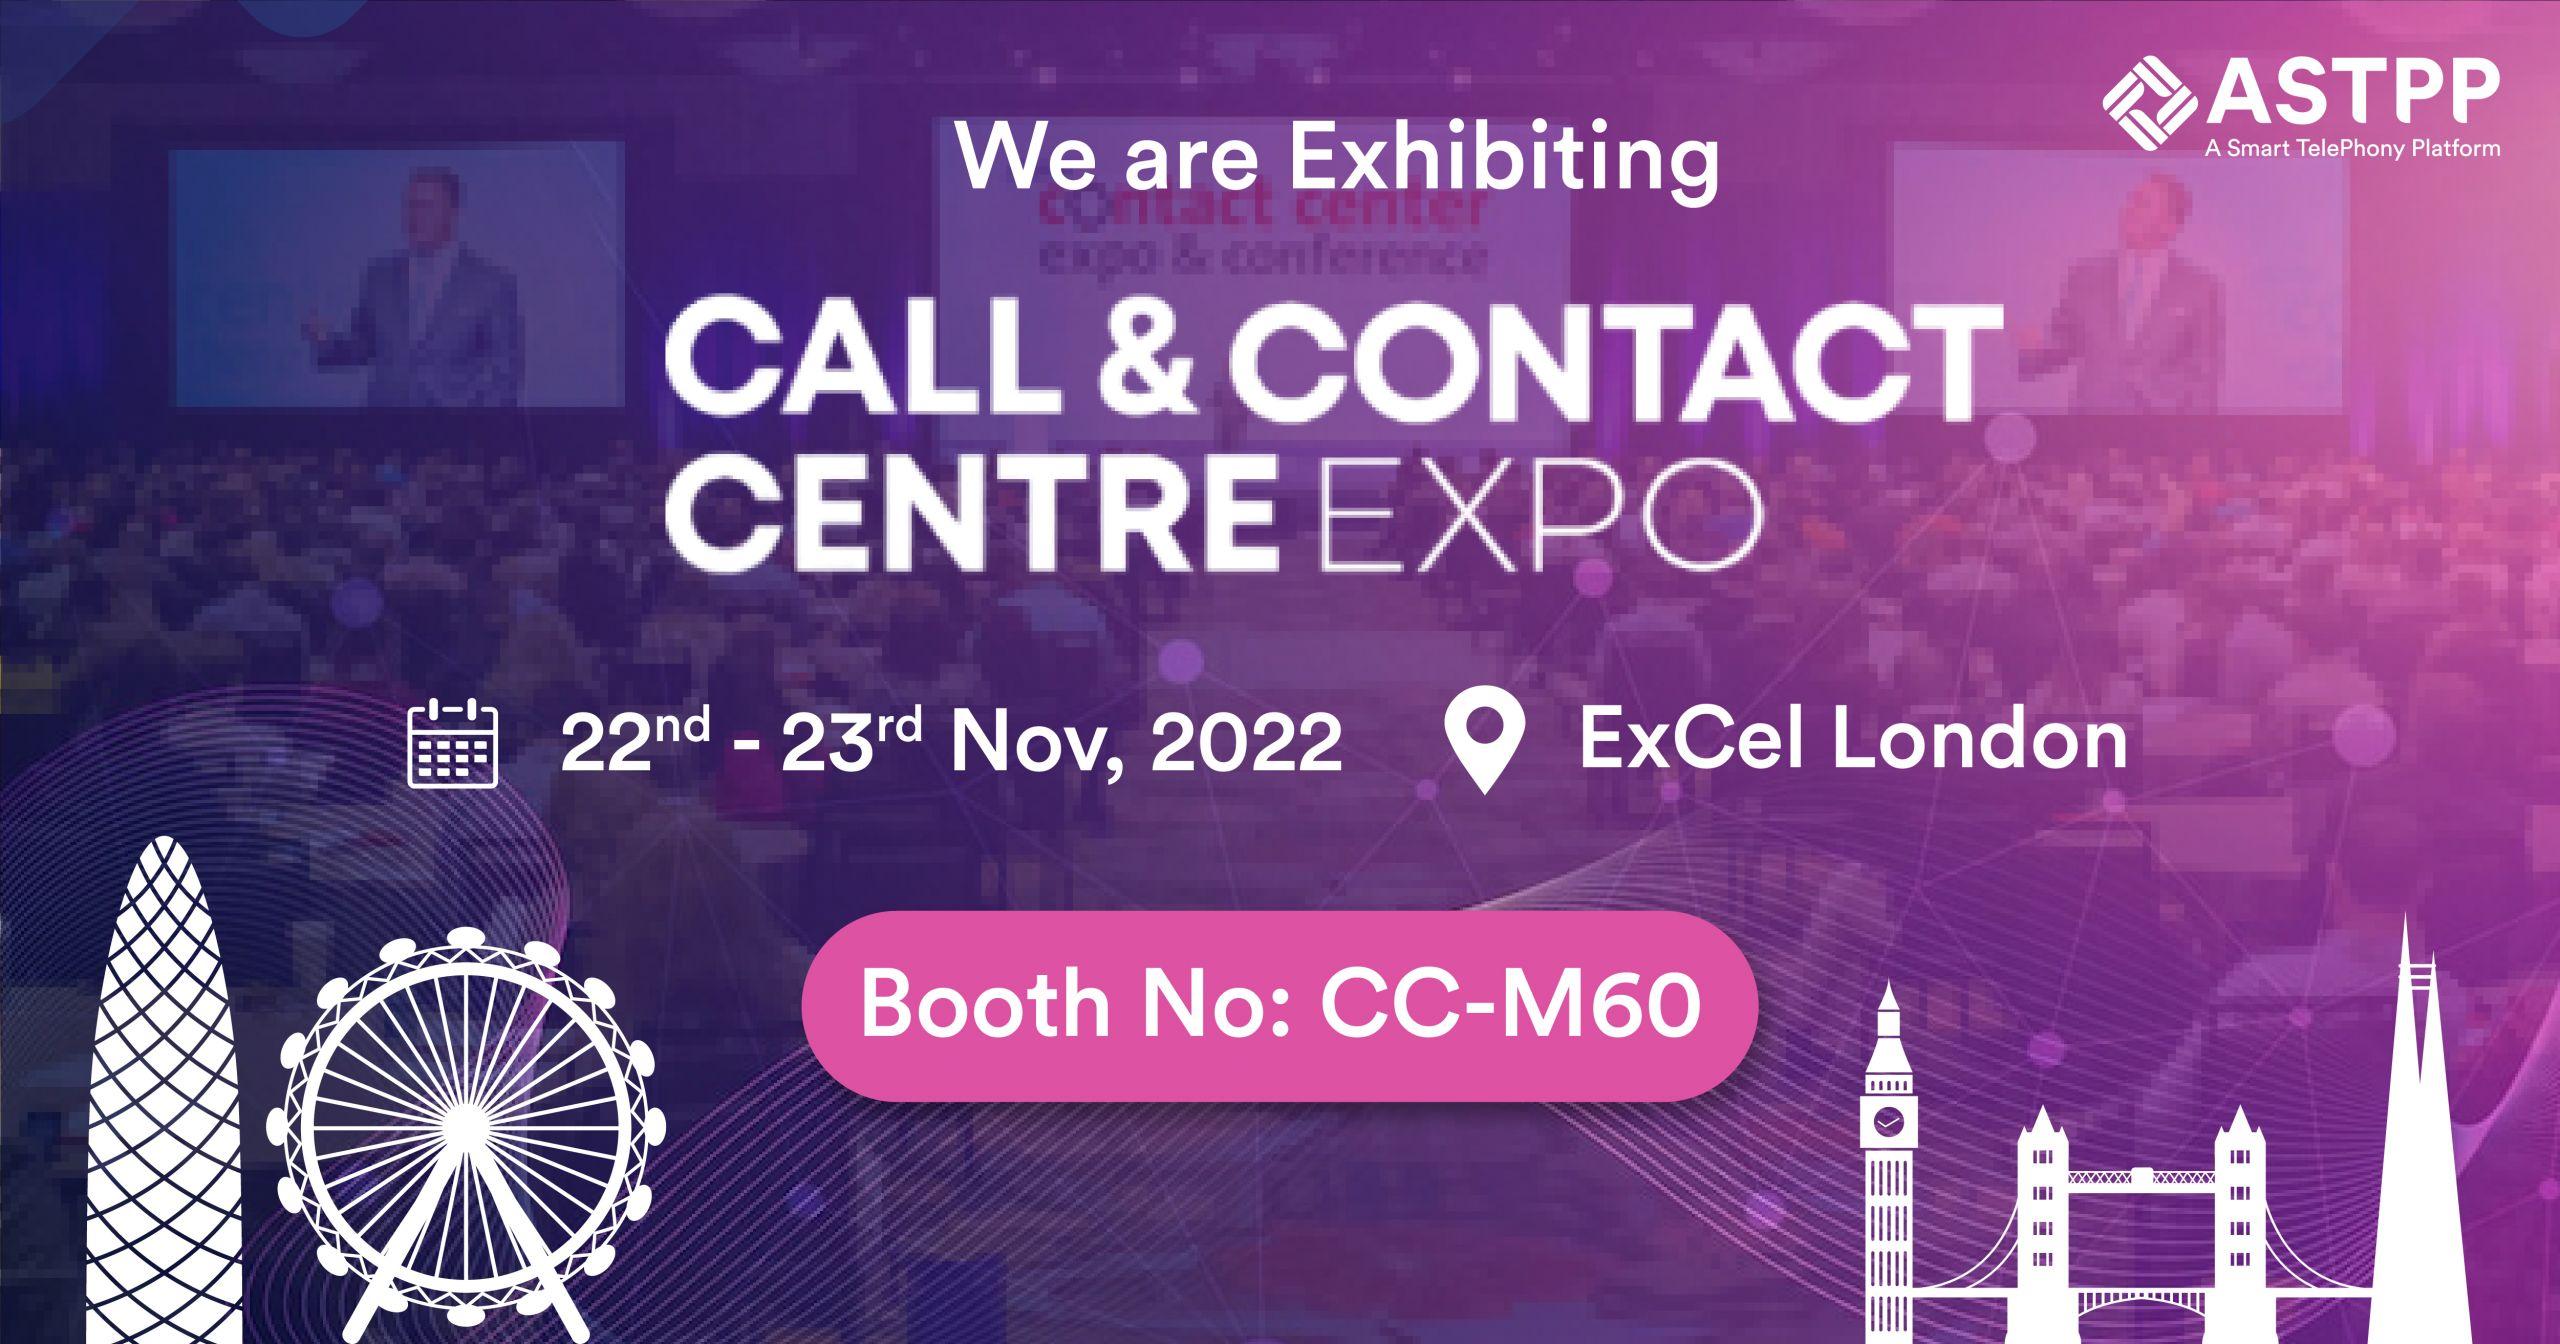 ASTPP Announced to Exhibit in CCC Expo London 2022